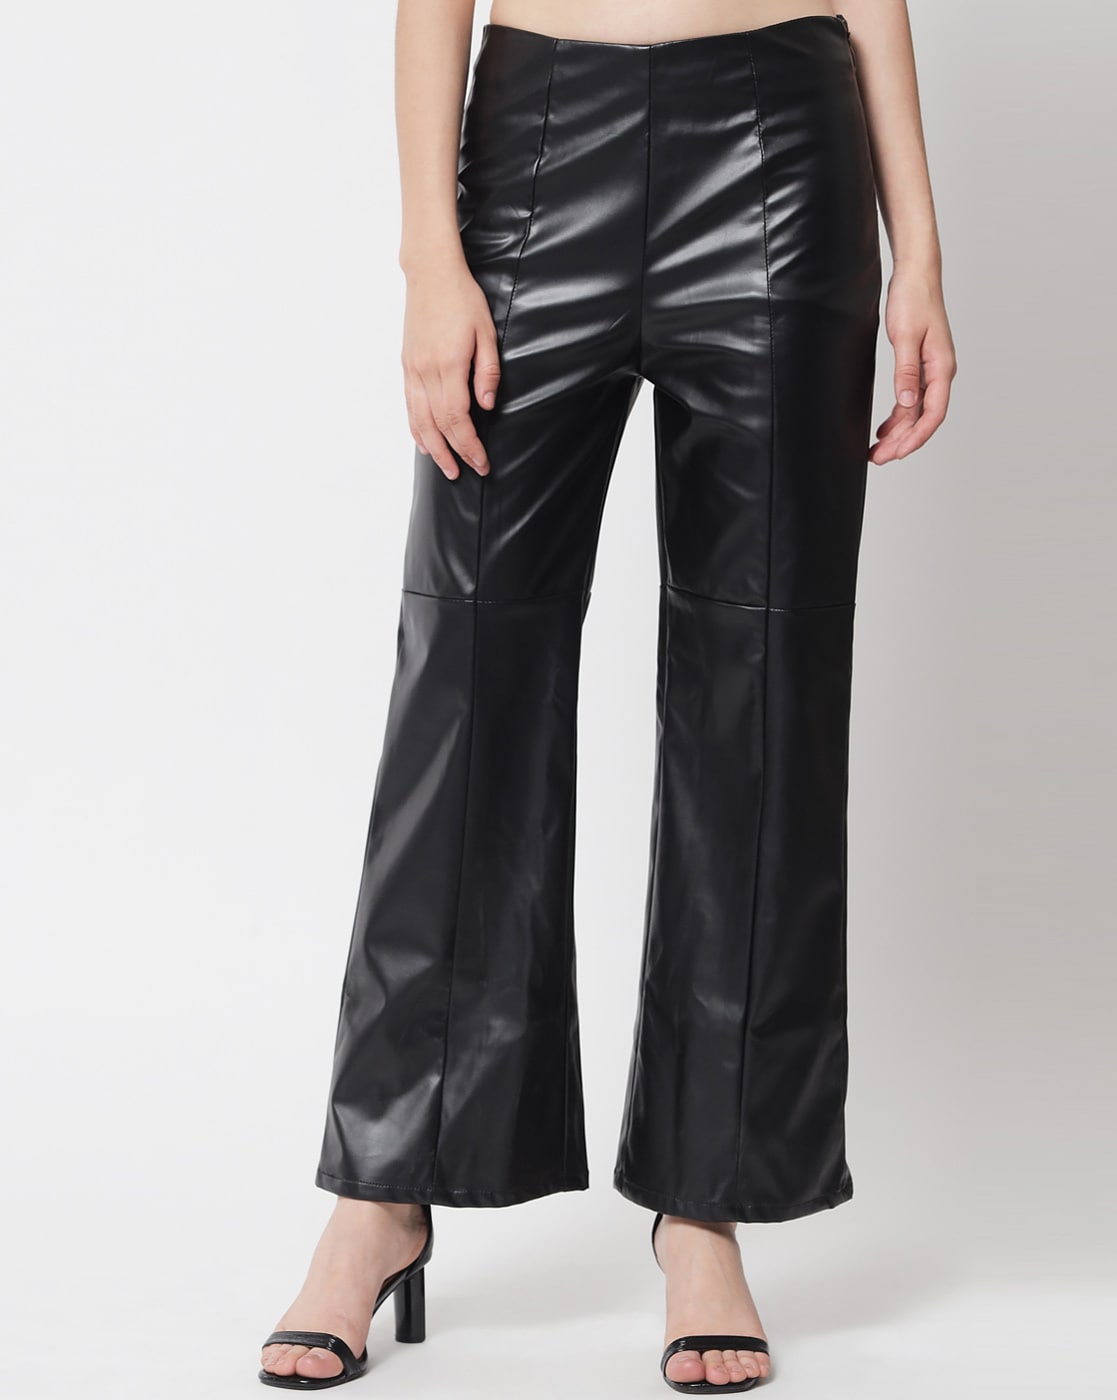 ABERCROMBIE  FITCH HAUL  NEW FAUX LEATHER TROUSERS  YouTube